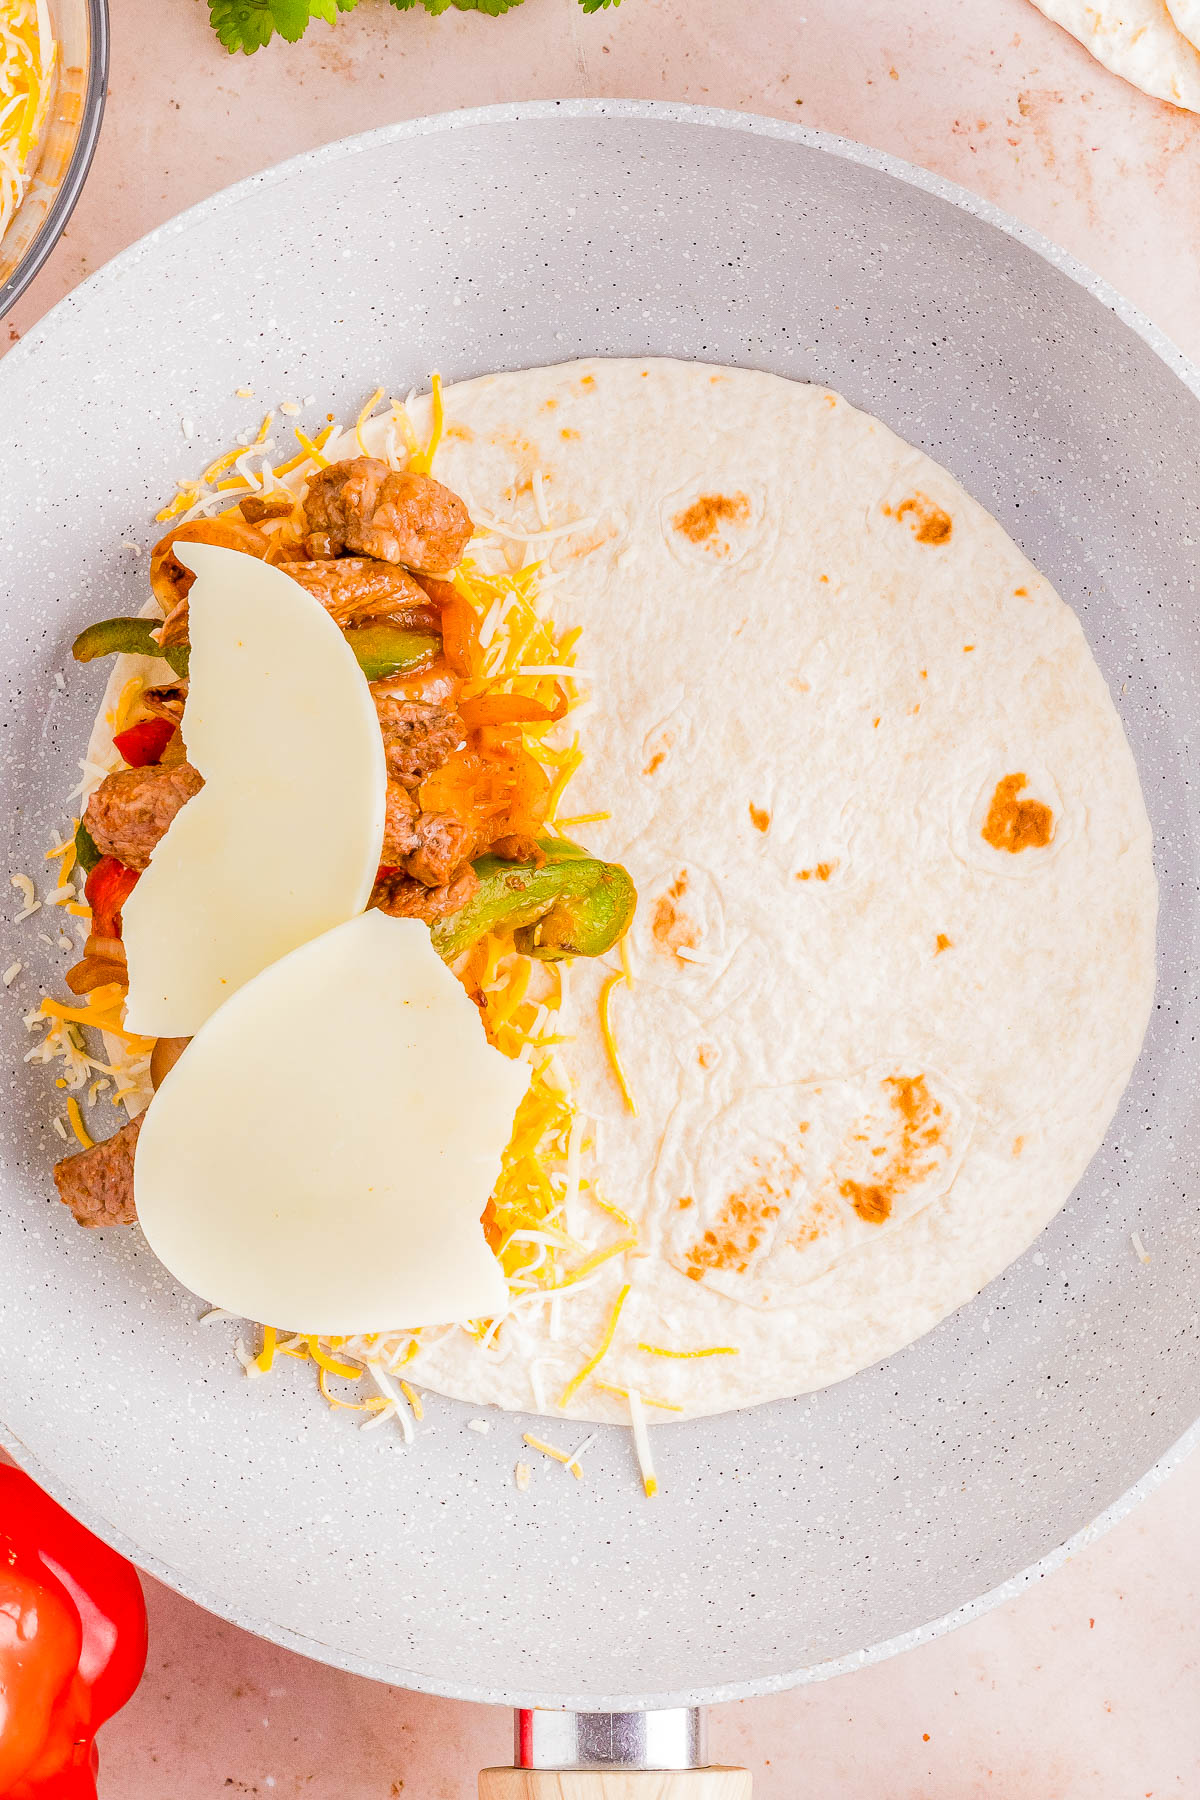 A tortilla with cheese, sliced bell peppers, and ground meat on a plate, ready for assembly.